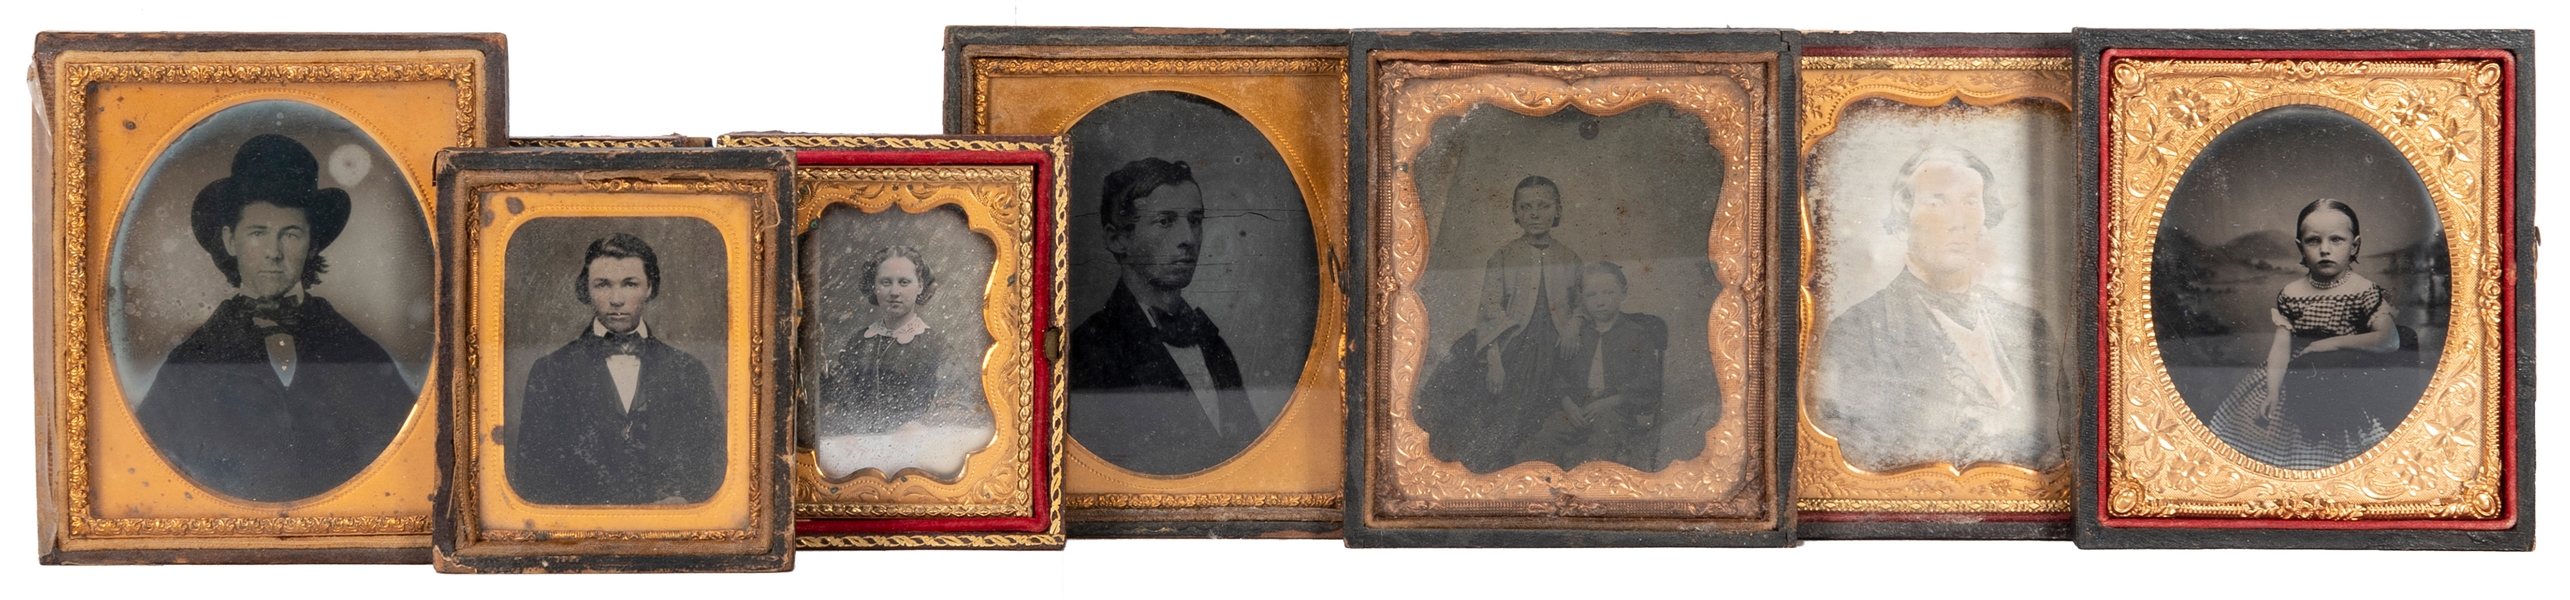  [EARLY PHOTOGRAPHY]. Collection of daguerreotypes, ambrotyp...